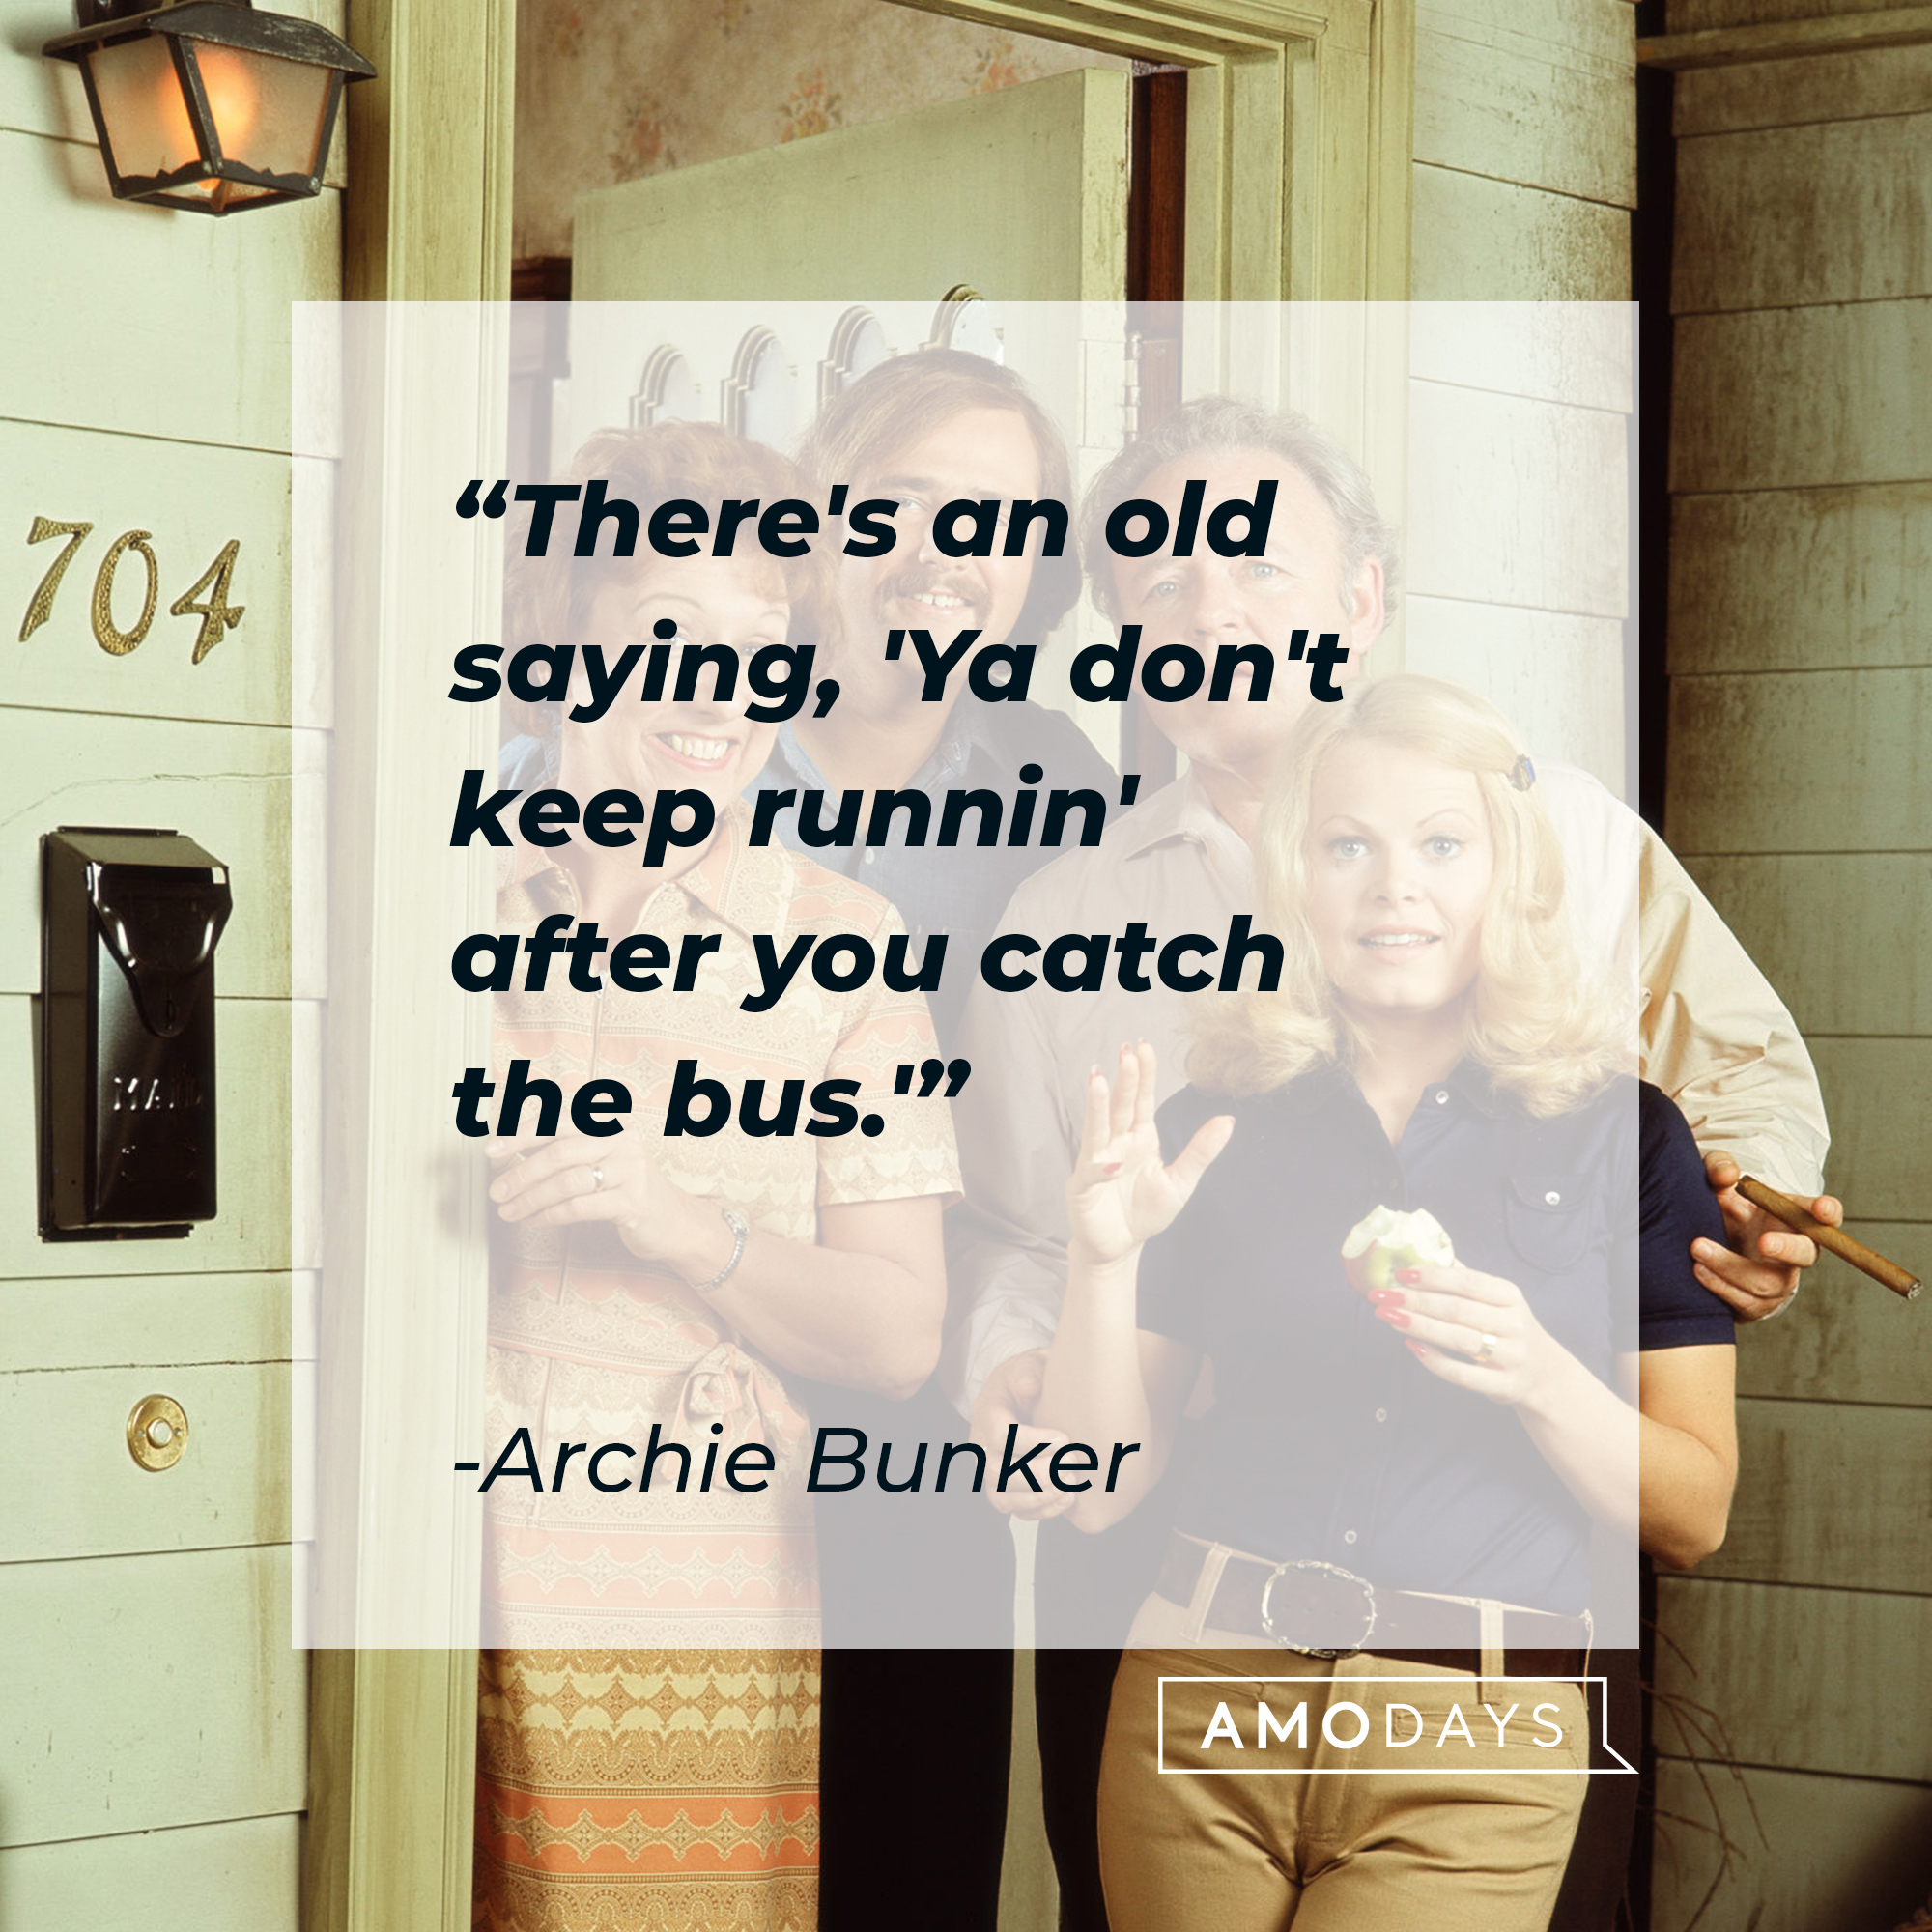 Archie Bunker's quote, "There's an old saying, 'Ya don't keep runnin' after you catch the bus.'" | Source: Getty Images